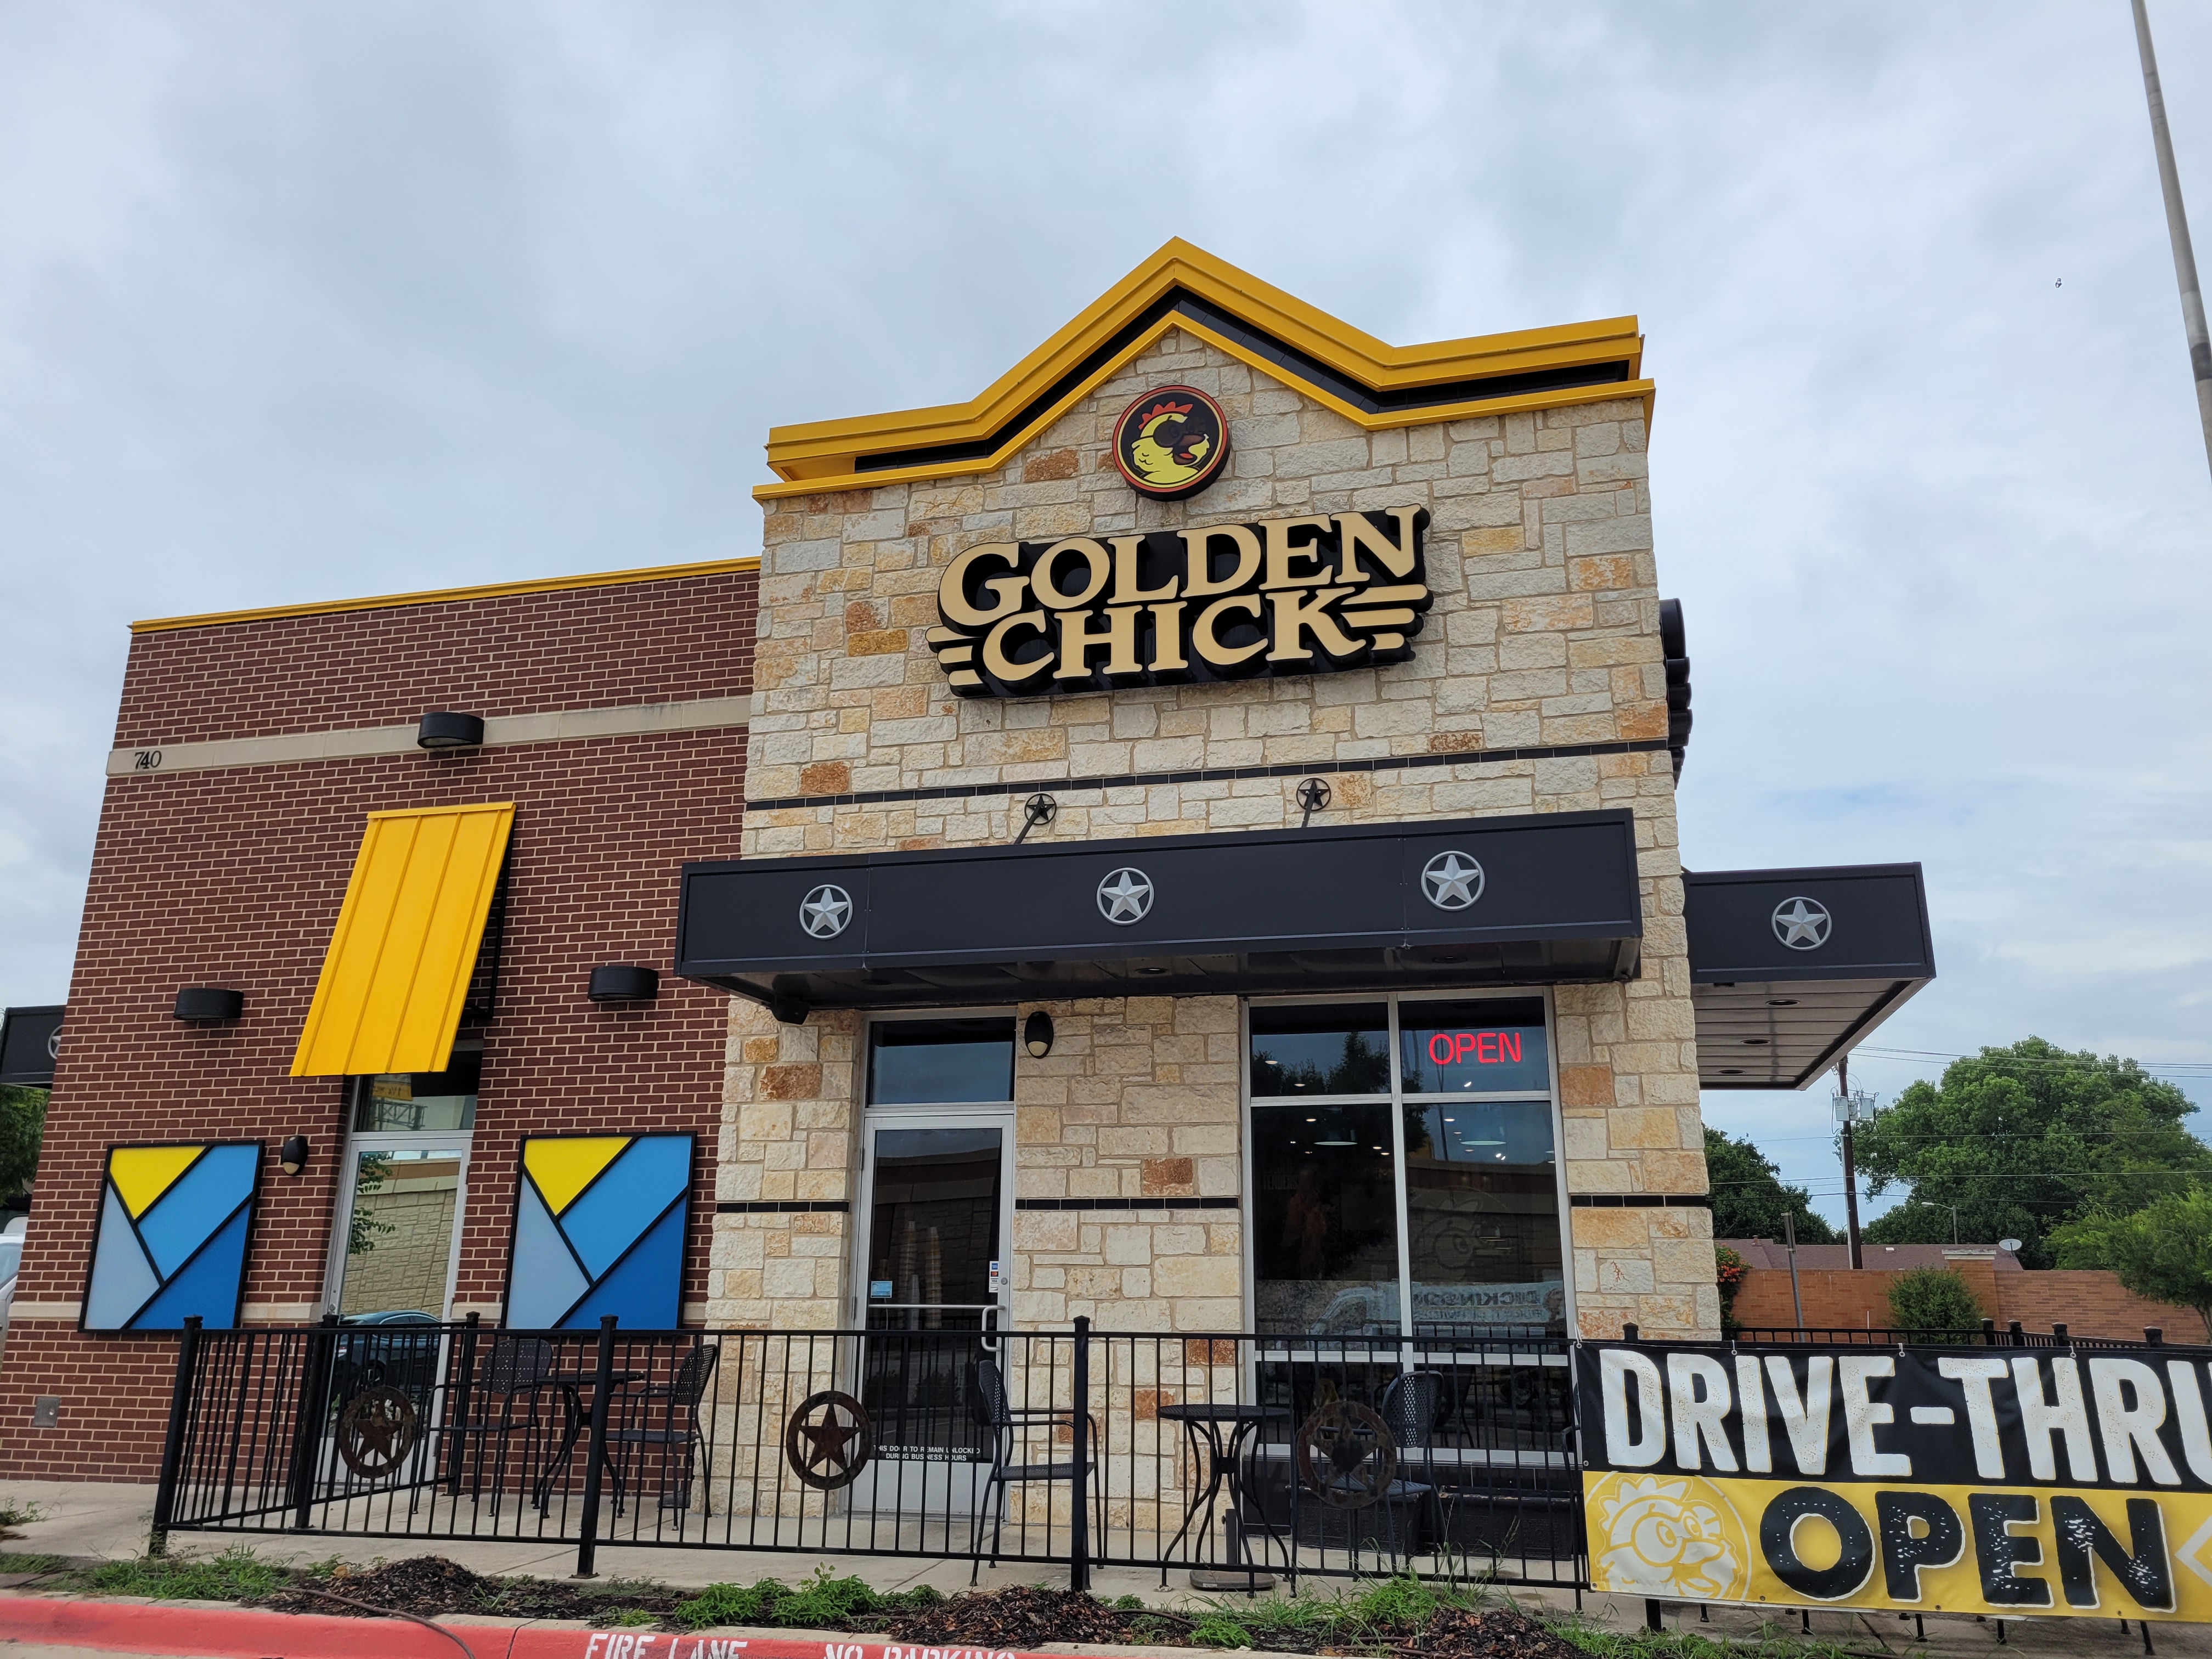 Golden Chick storefront.  Your local Golden Chick fast food restaurant in Hurst, Texas